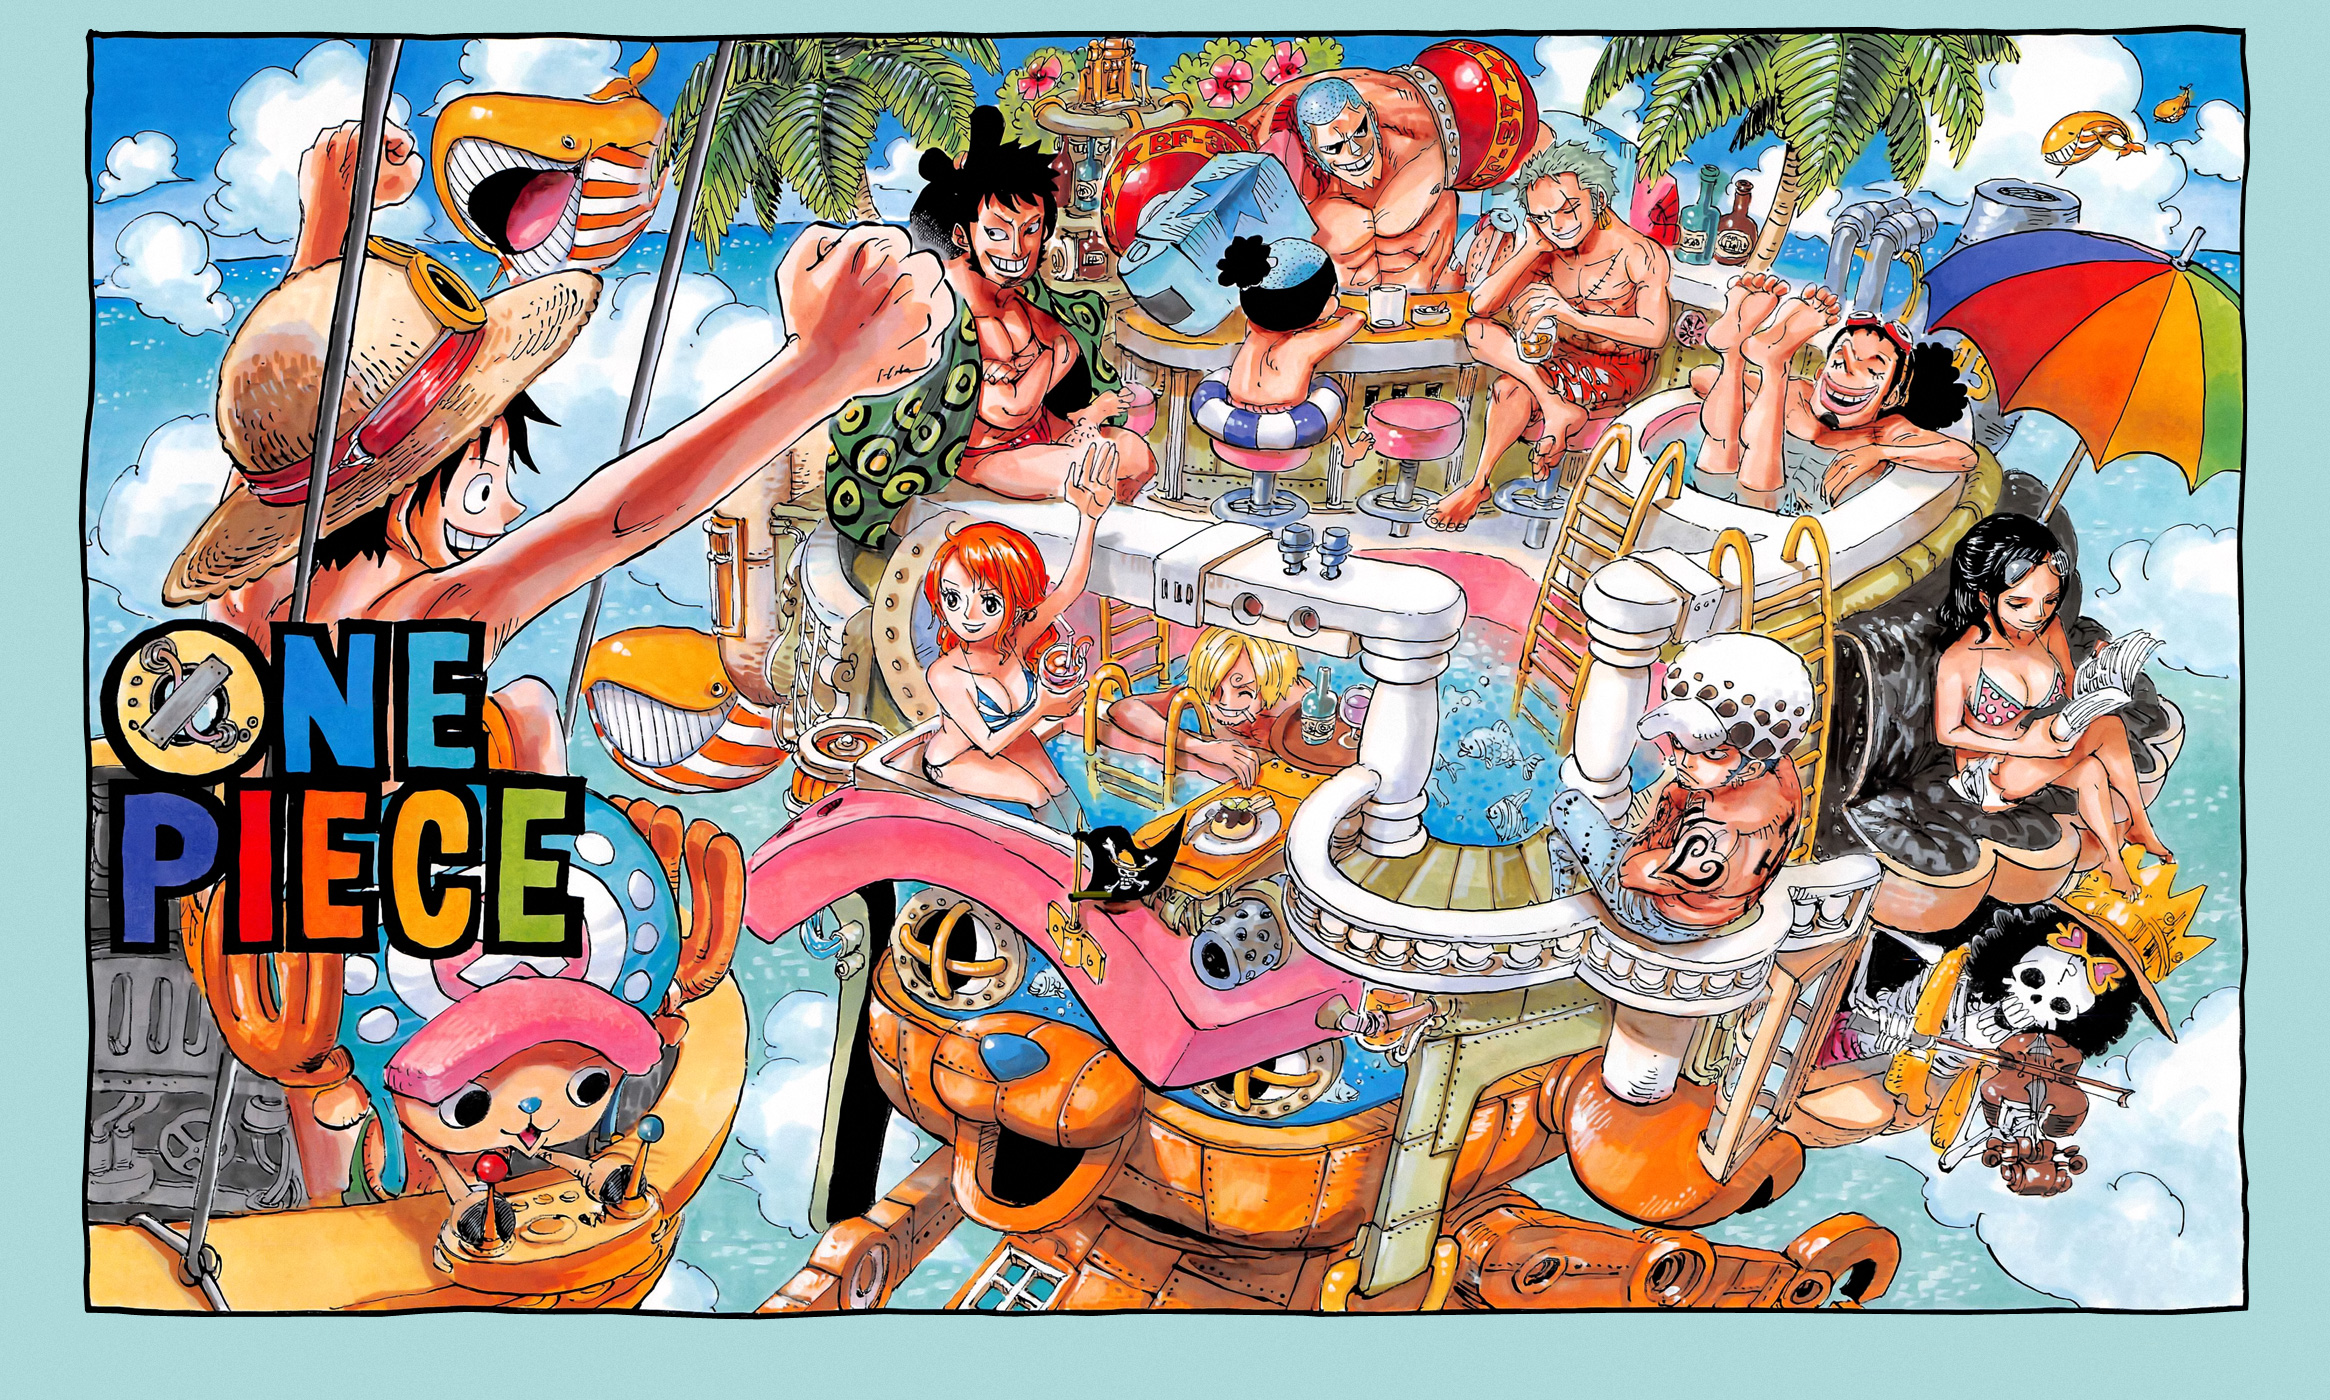 11 One Piece 701-801 ideas  one piece, manga pages, one piece chapter